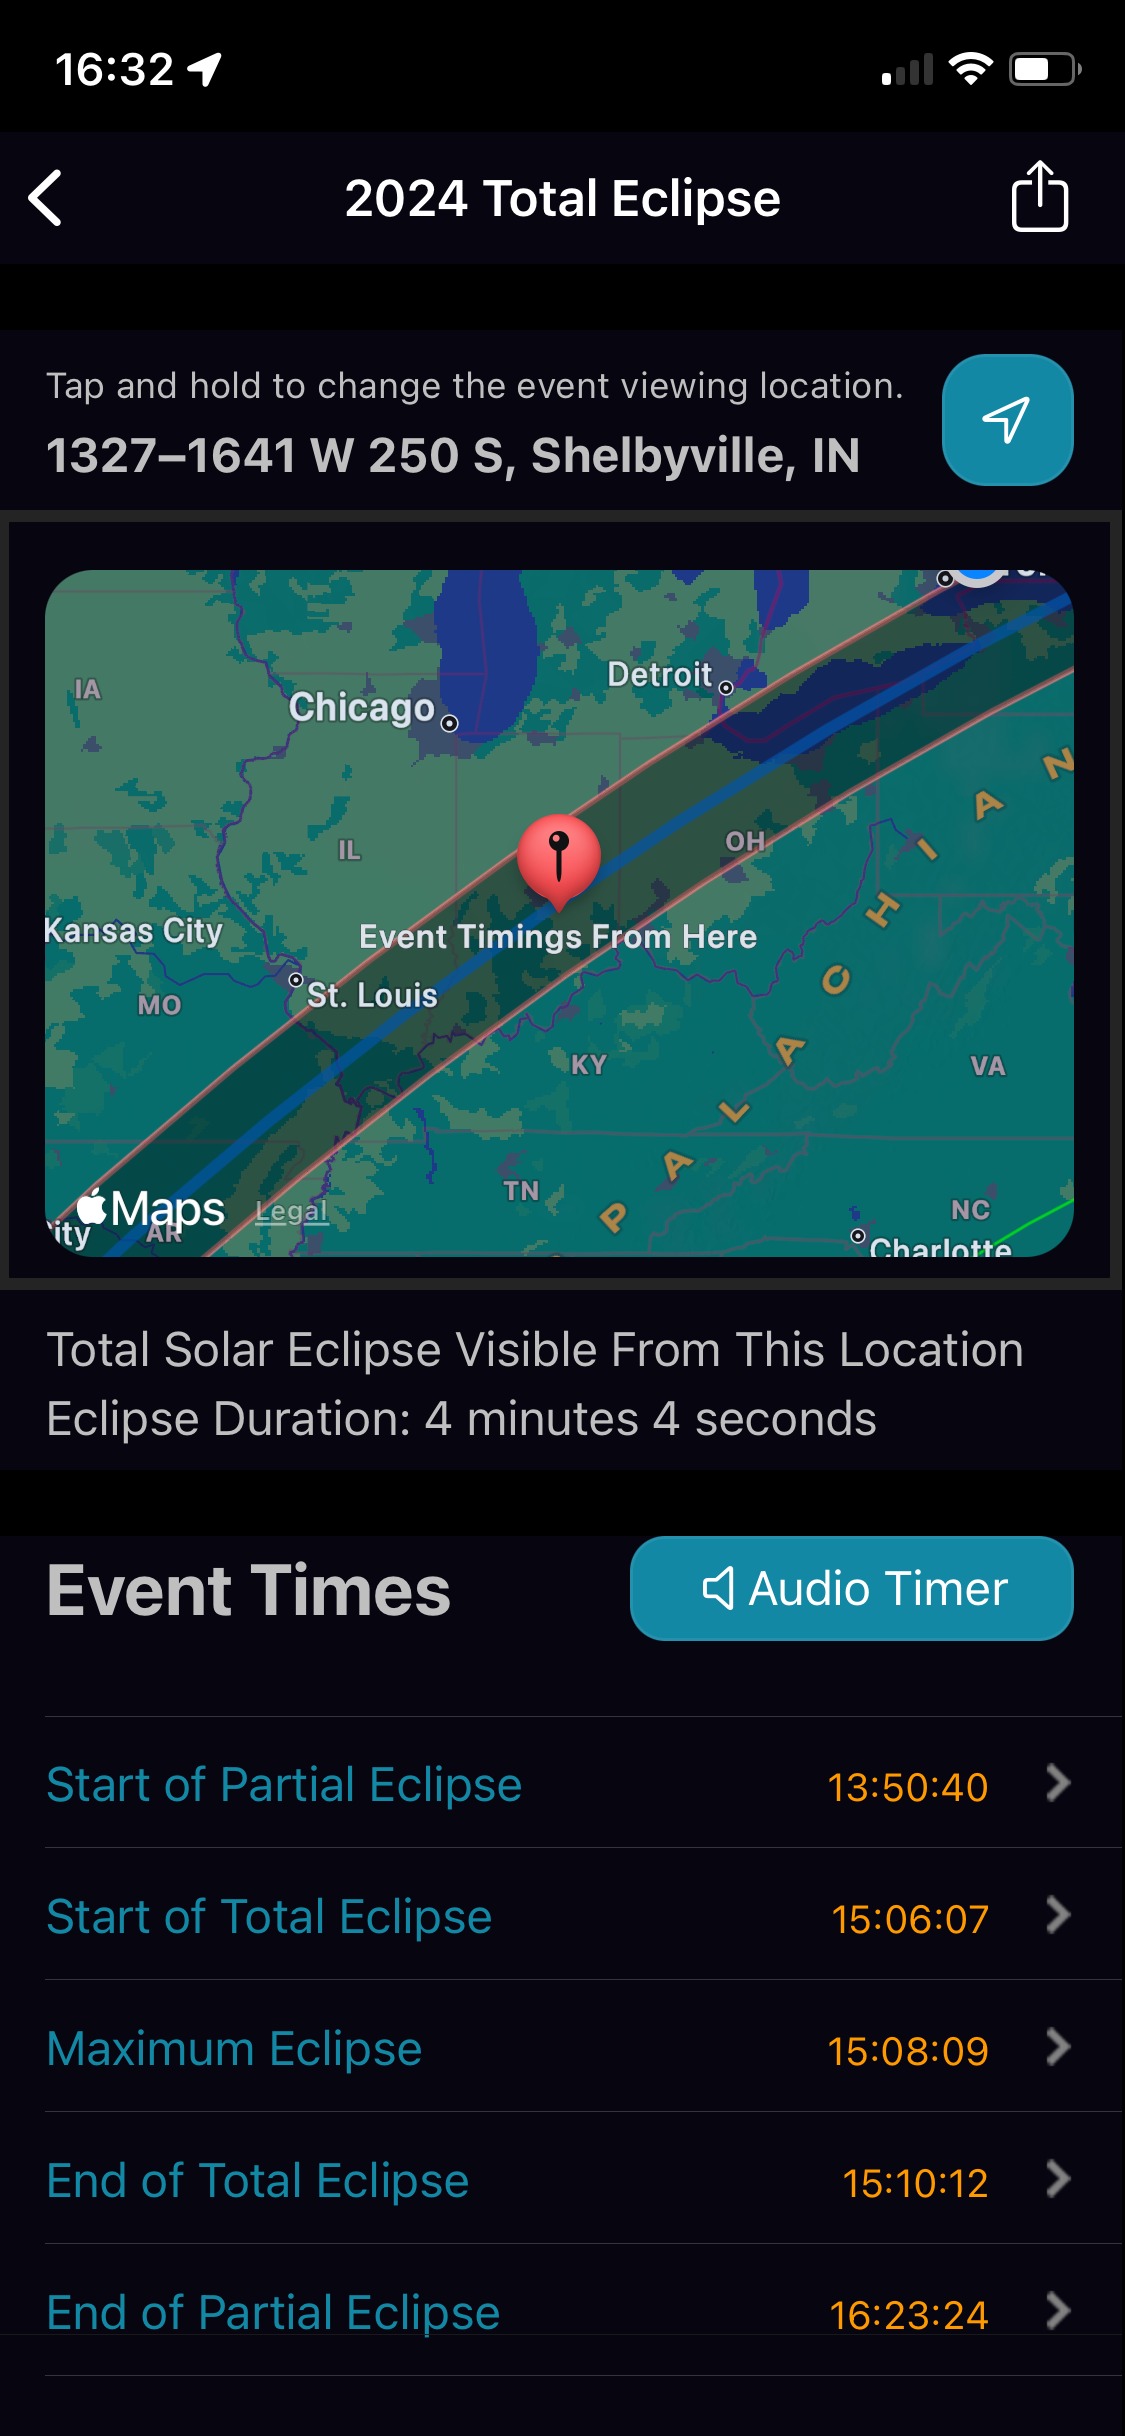 a view of a phone with an eclipse band and a spot on the map. underneath are different timings for maximum eclipse, end of total eclipse, and end of partial eclipse